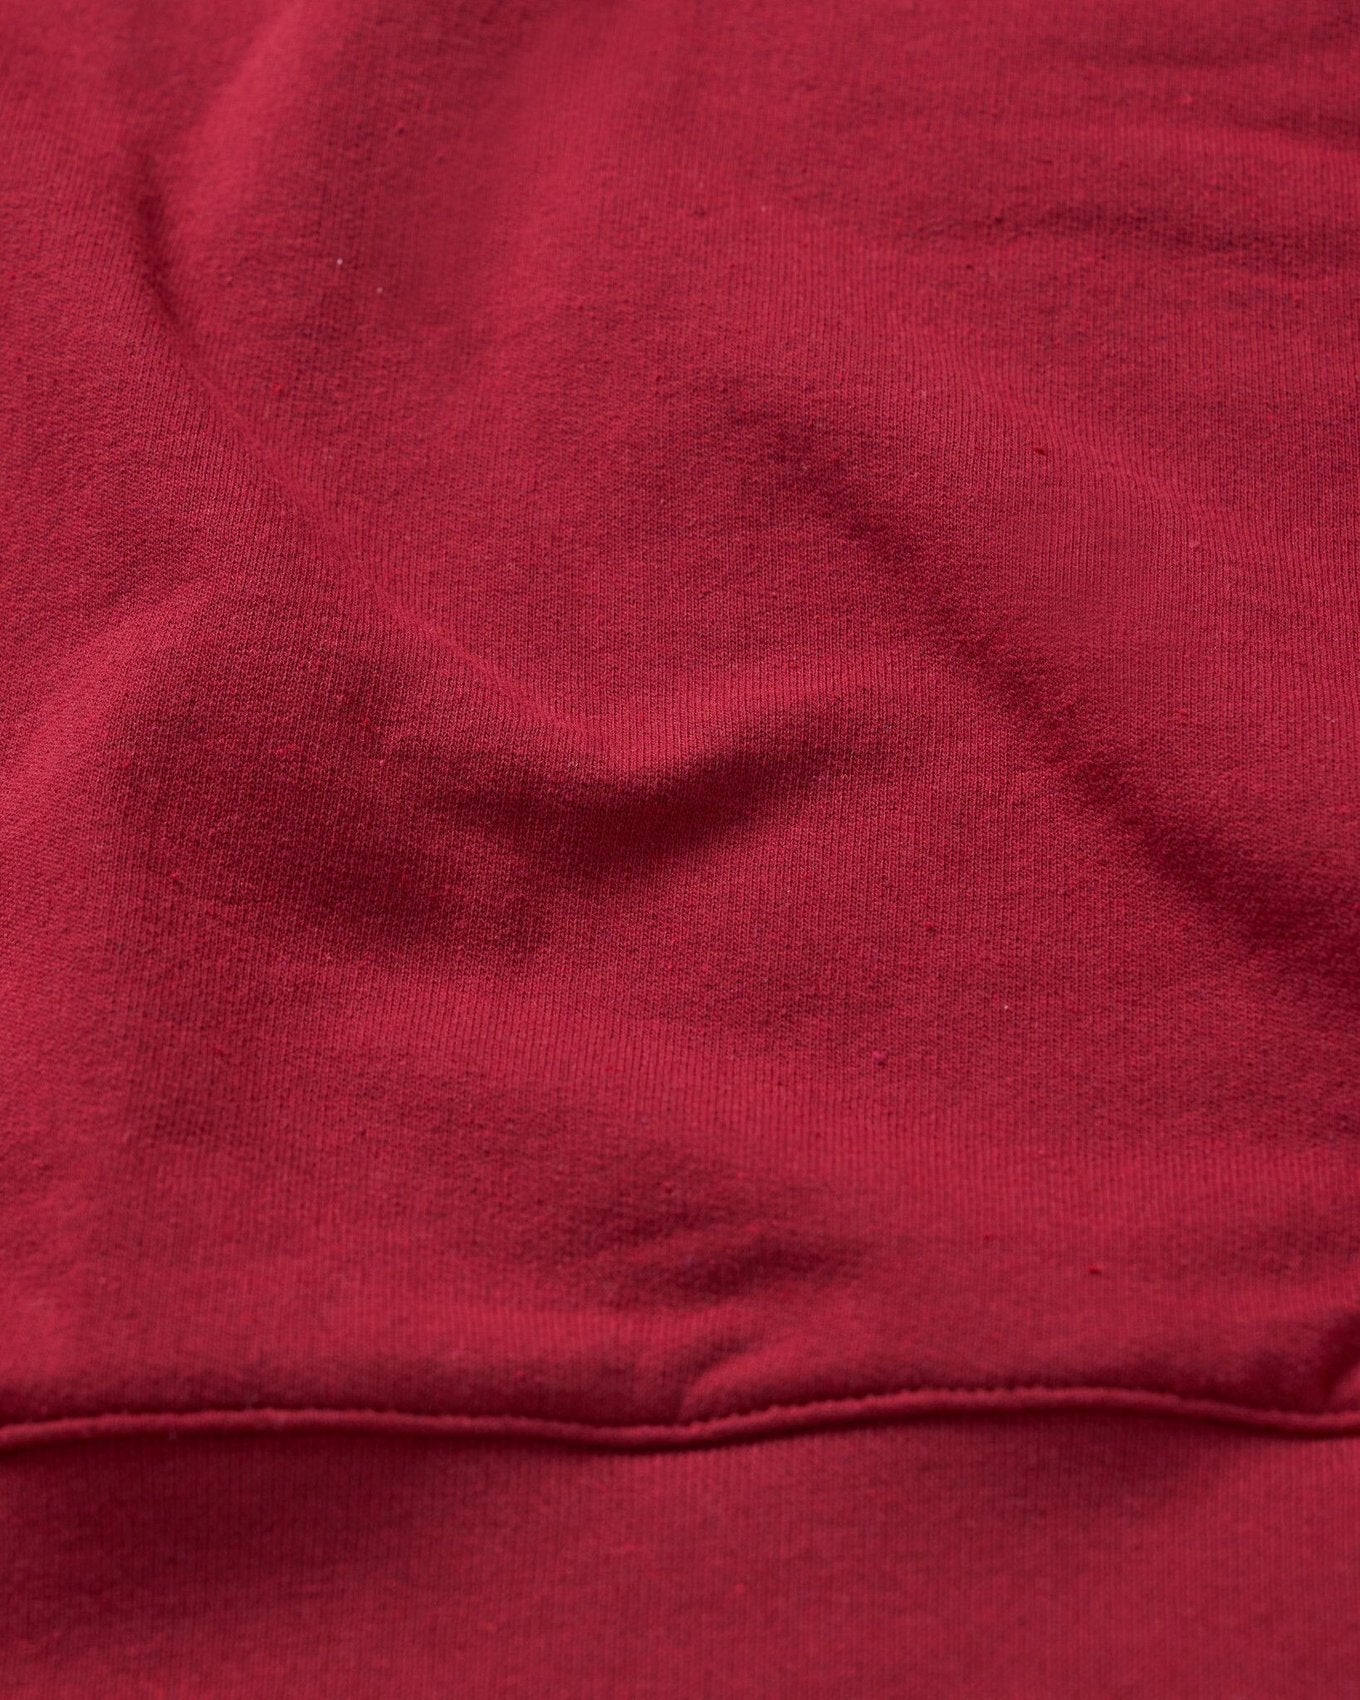 ReApparel Save Crew Neck . in color Garnet and shape long sleeve